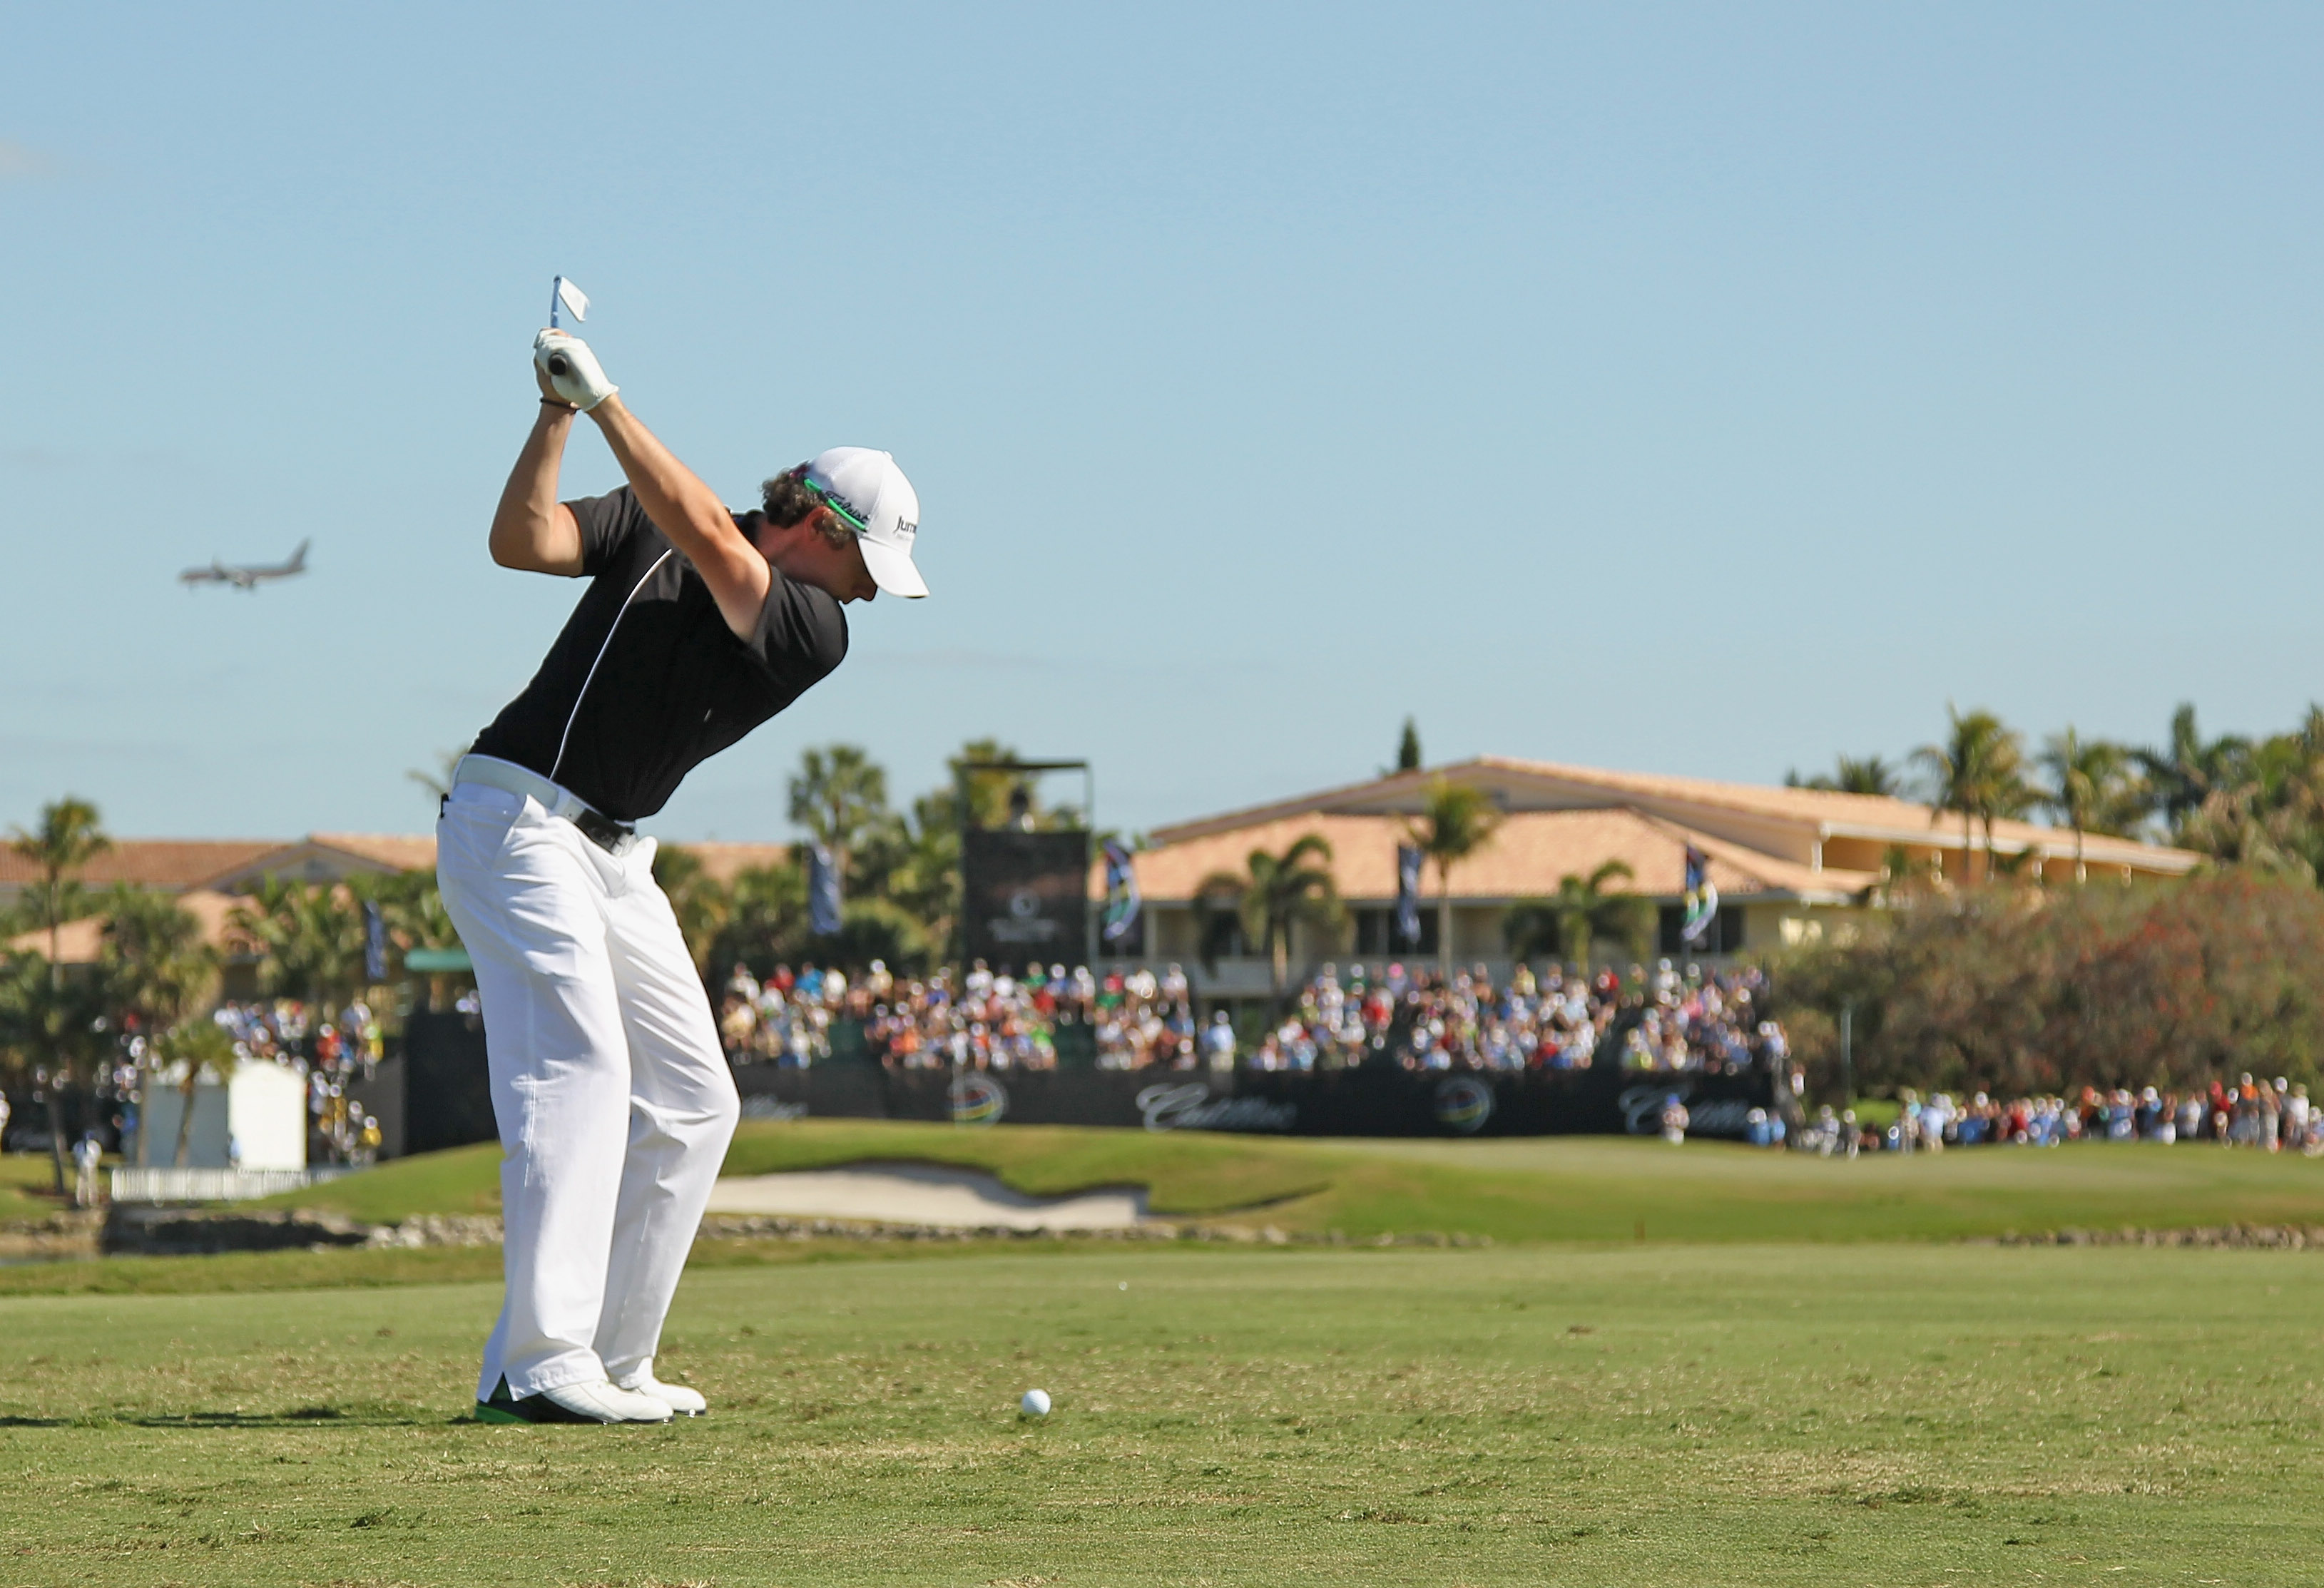 DORAL, FL - MARCH 13:  Rory McIlroy of Northern Ireland hits his tee shot on the ninth hole during the final round of the 2011 WGC- Cadillac Championship at the TPC Blue Monster at the Doral Golf Resort and Spa on March 13, 2011 in Doral, Florida.  (Photo